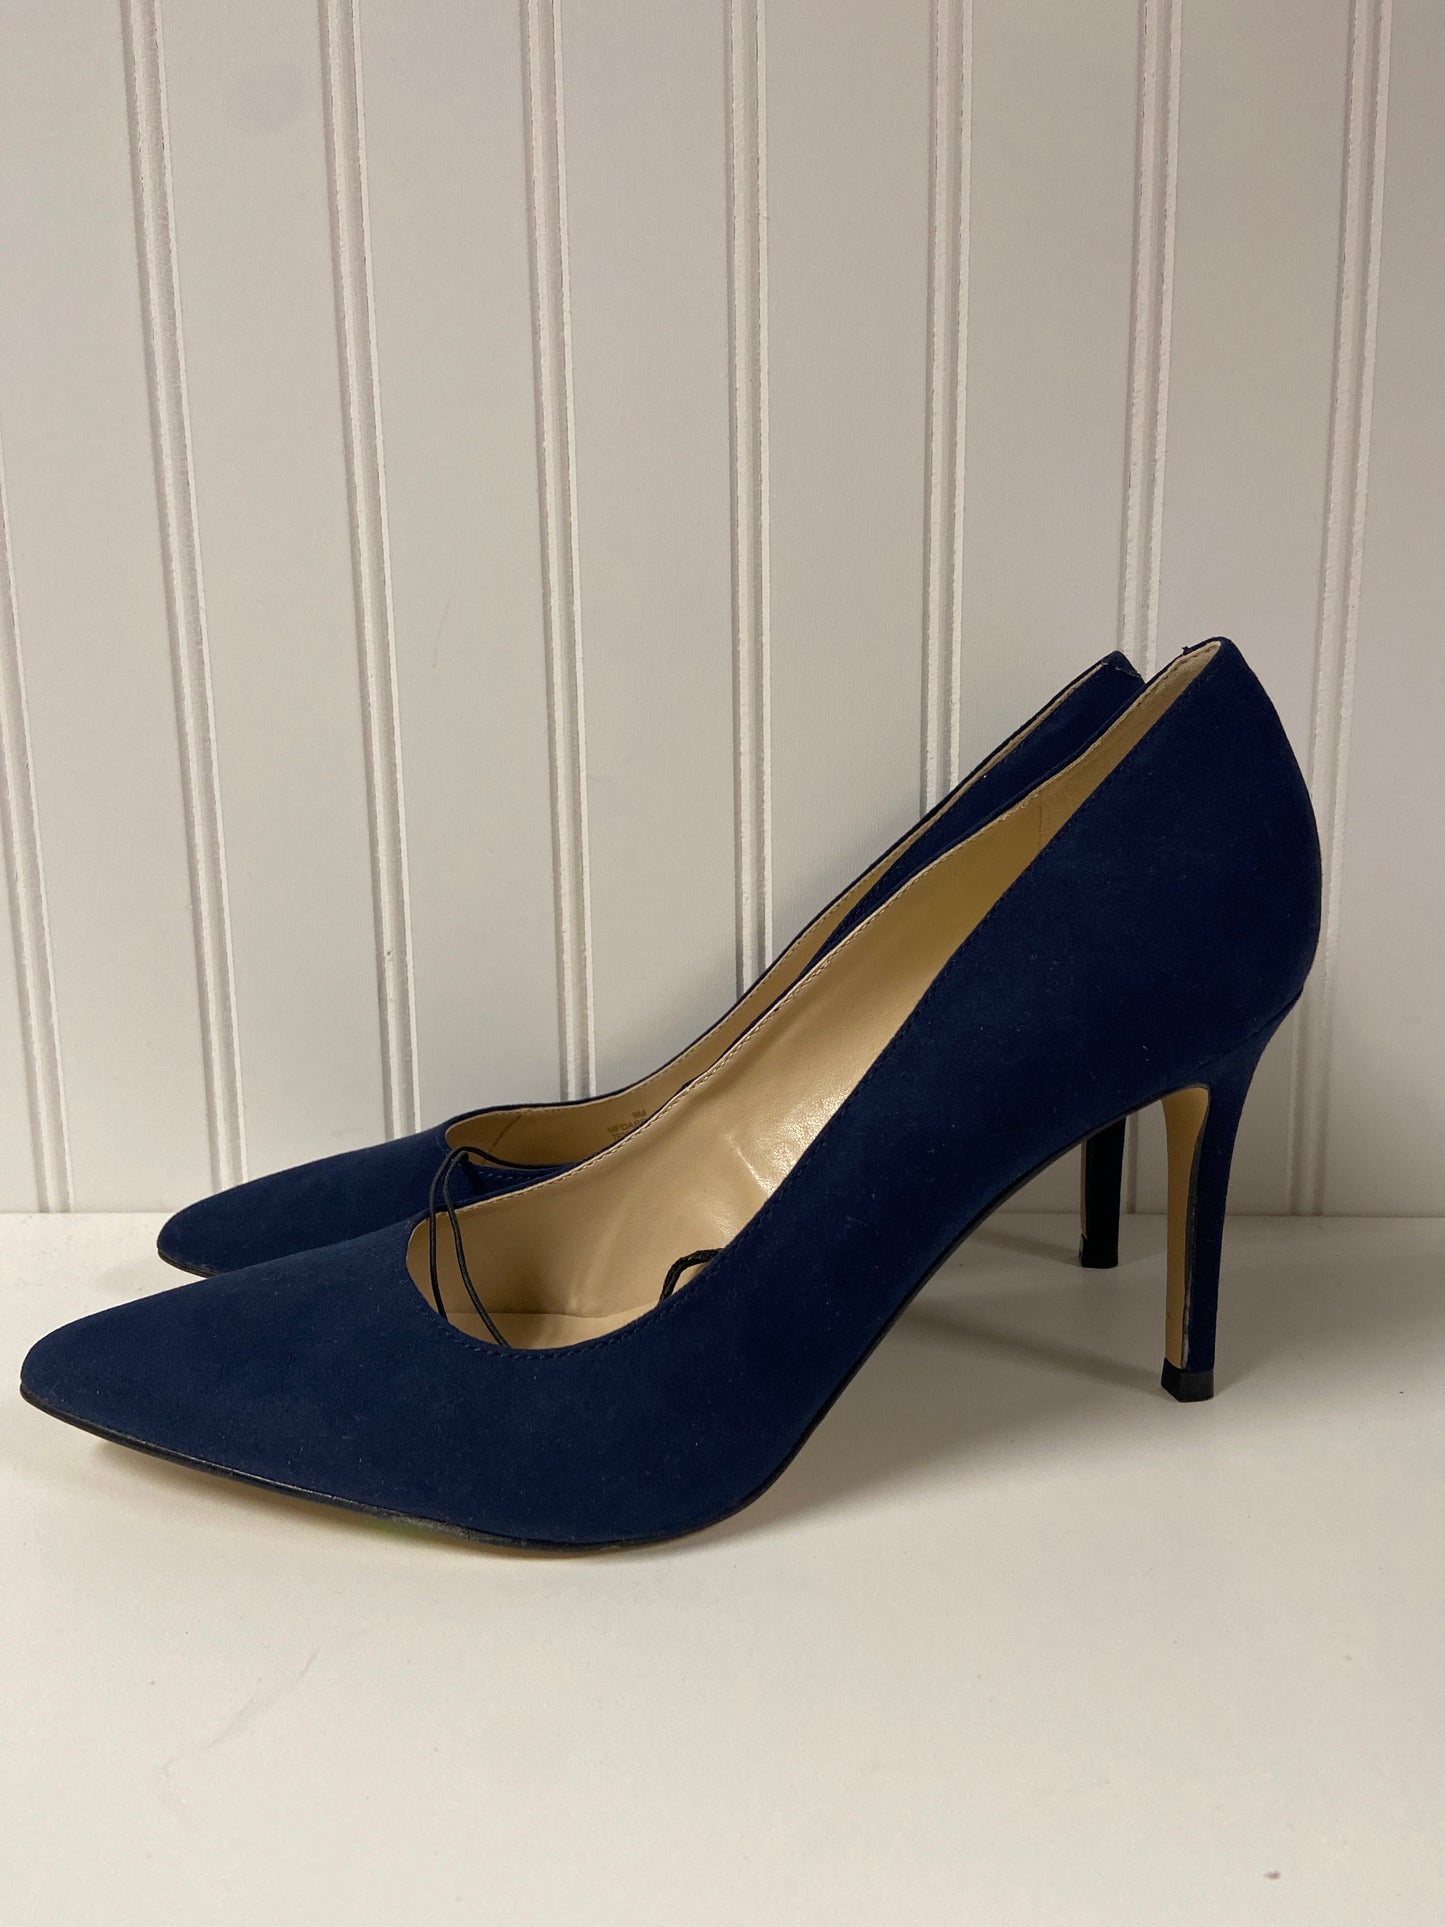 Shoes Heels Stiletto By Marc Fisher  Size: 9